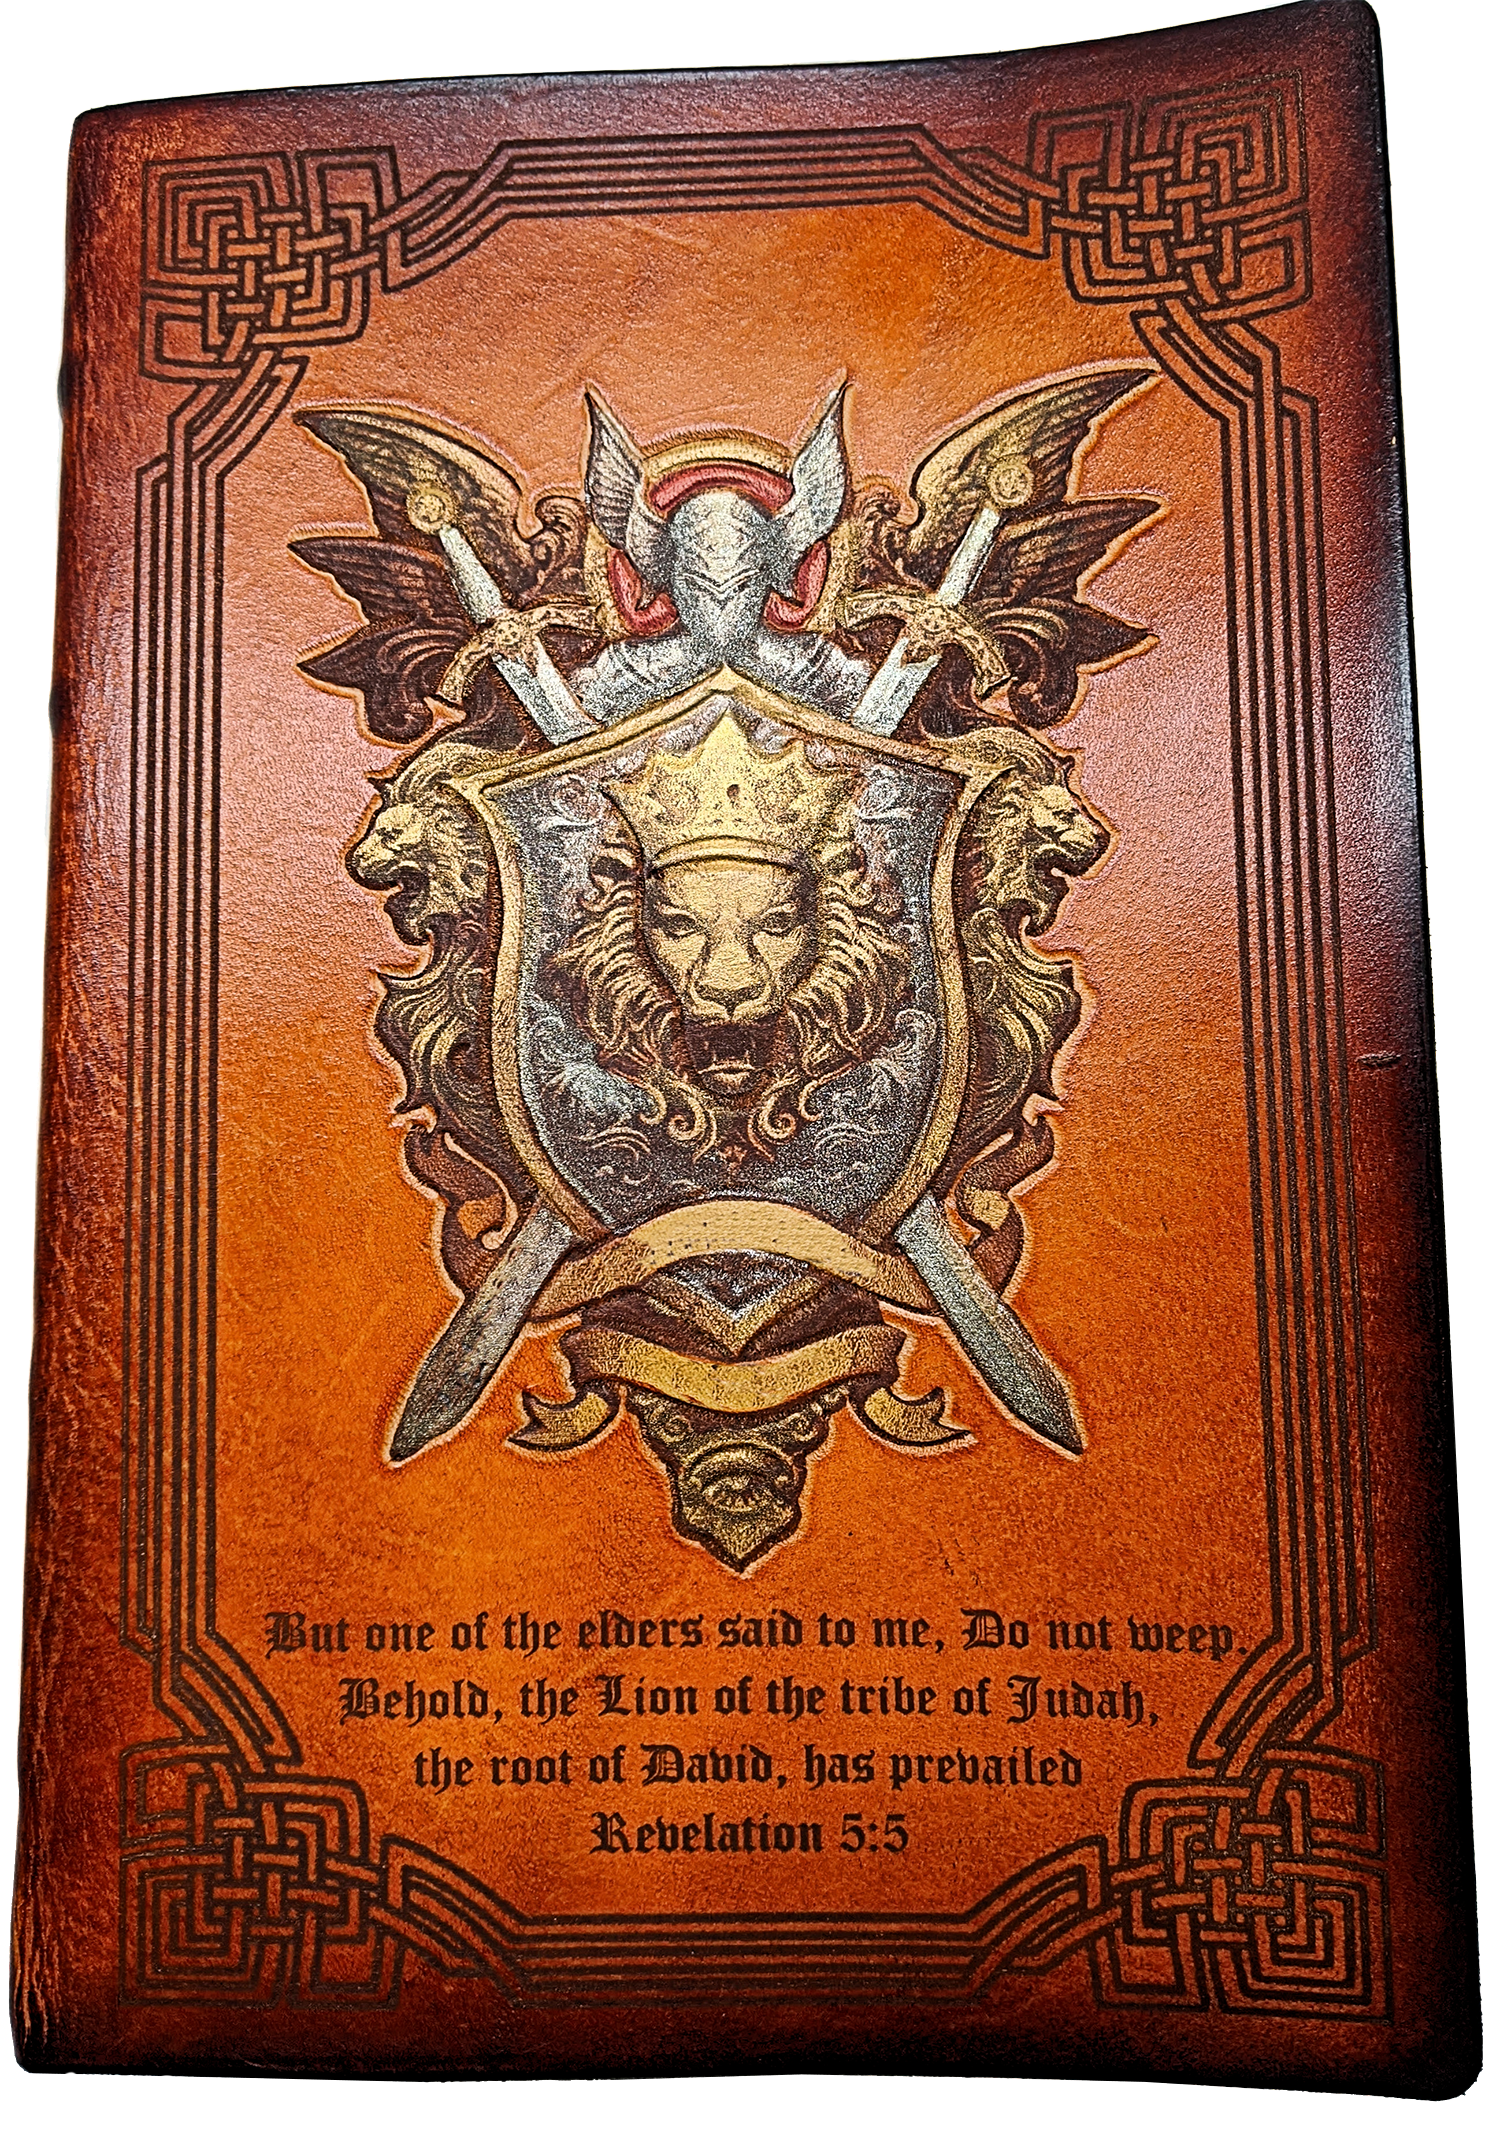 A custom leather bound bible with a coat of arms and Celtic border, custom engraved and hand painted with metallic highlights. Text reads: But one of the elders said to me, Do not weep. Behold, the Lion of the tribe at Judah, the root of David, has prevailed. - Revelation 5:5